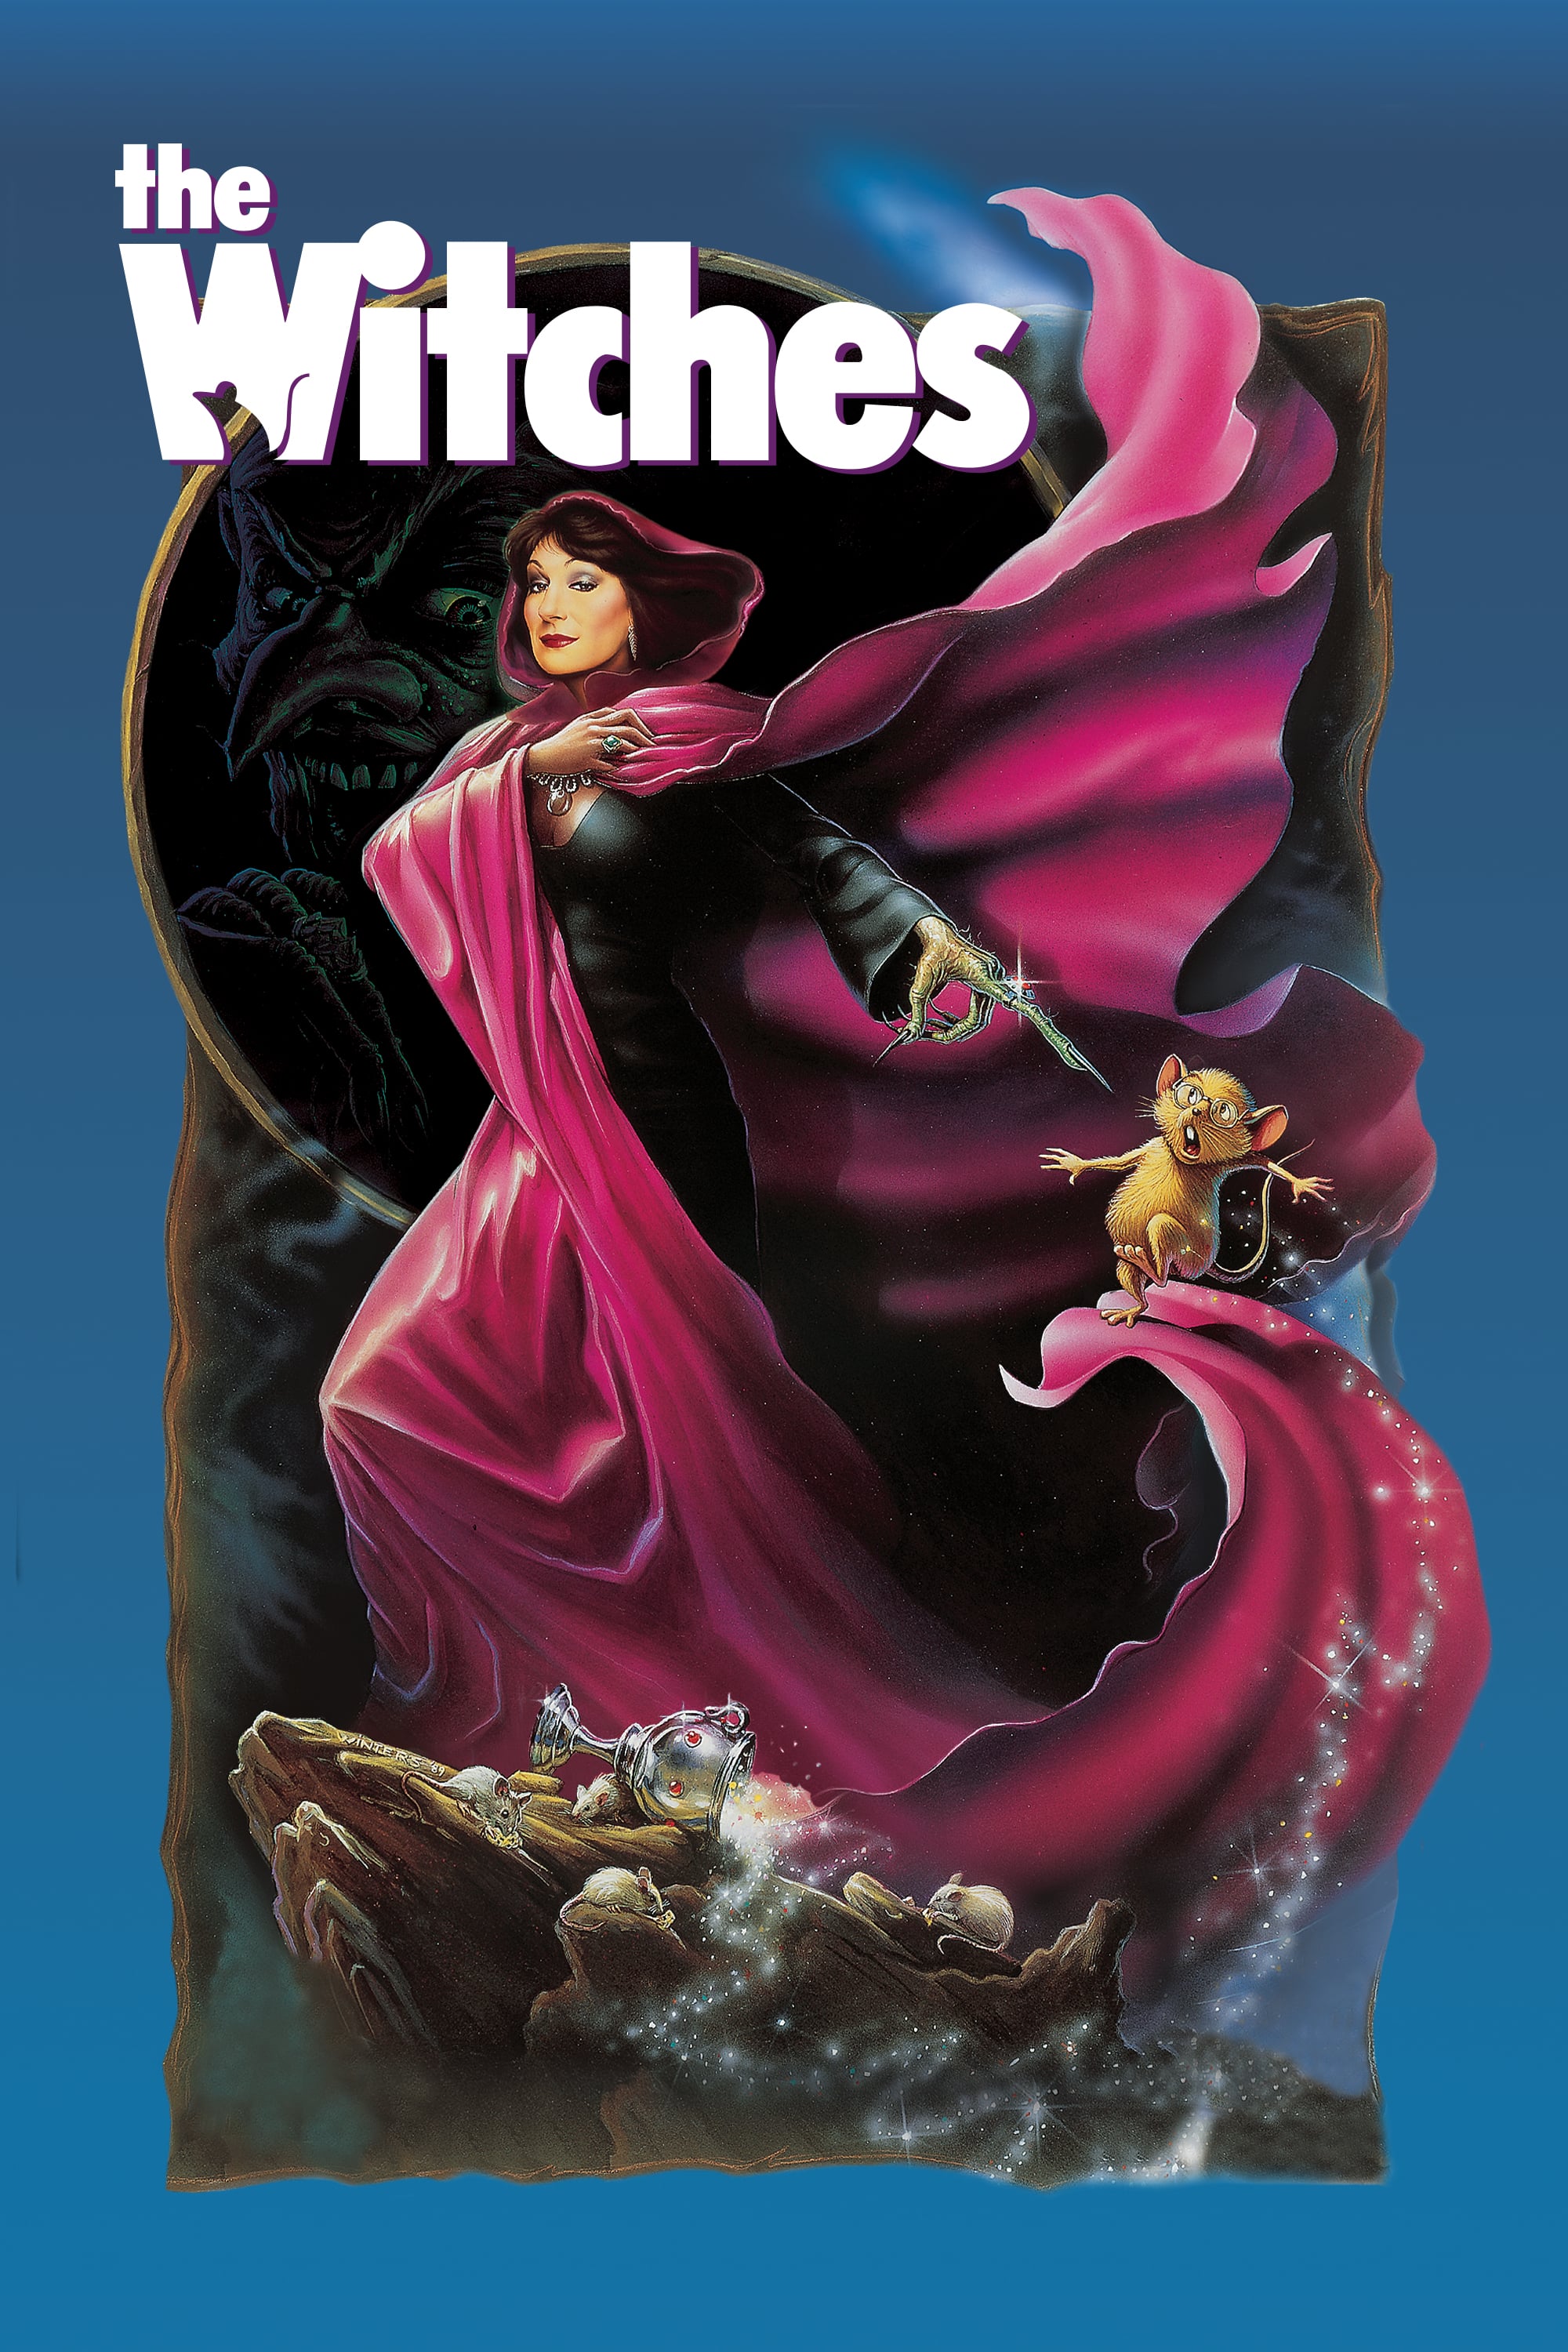 The Witches (1990) Picture